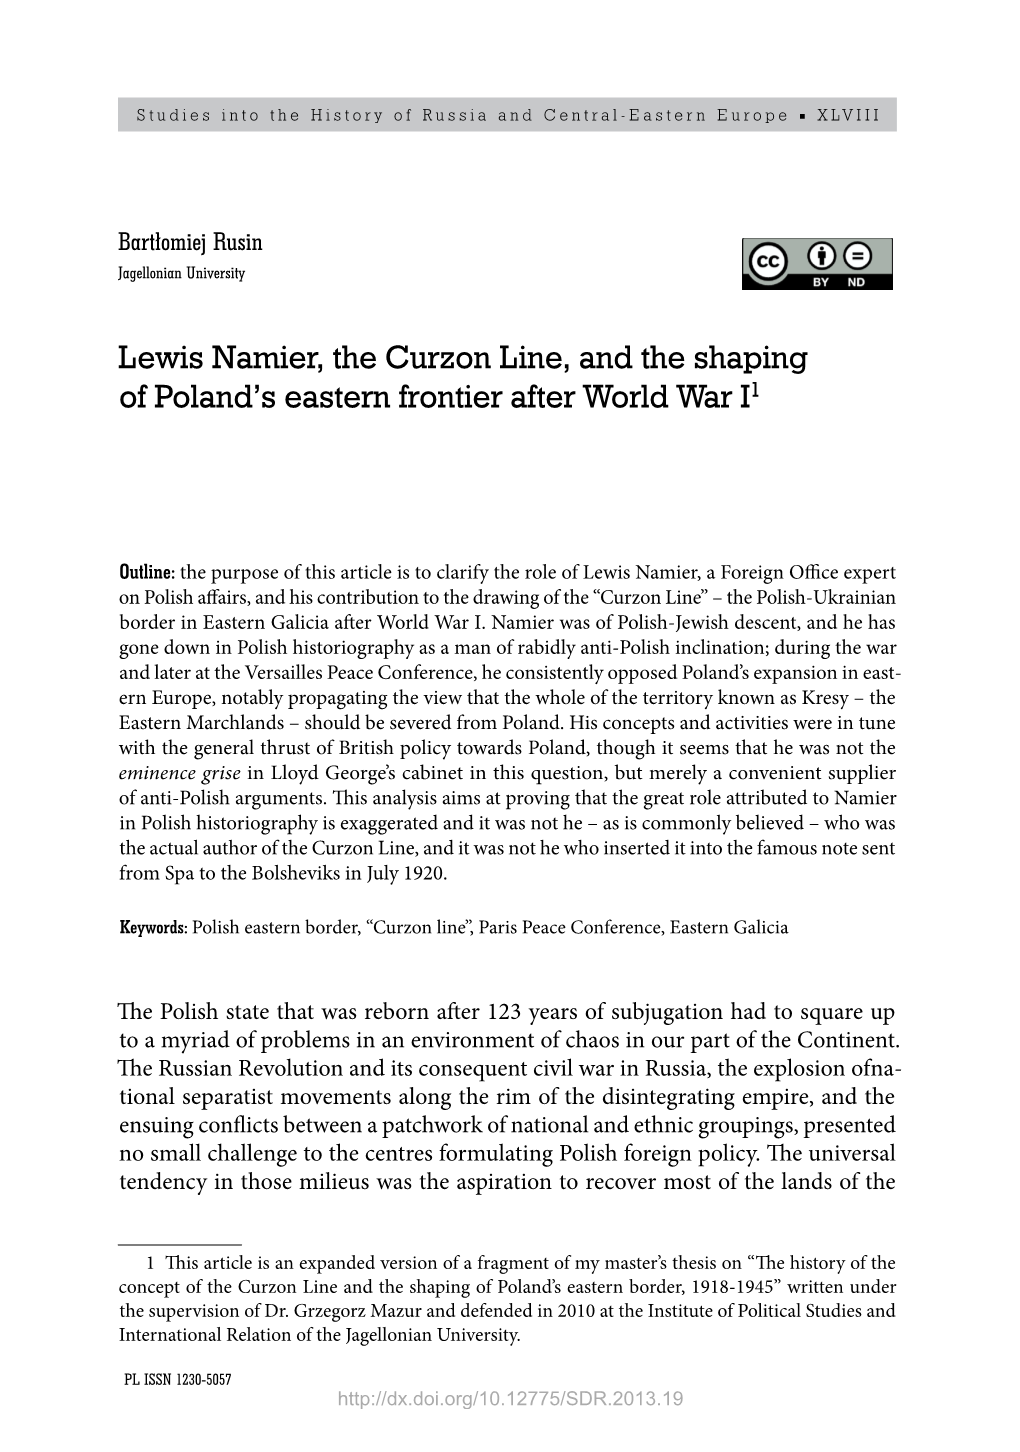 Lewis Namier, the Curzon Line, and the Shaping of Poland's Eastern